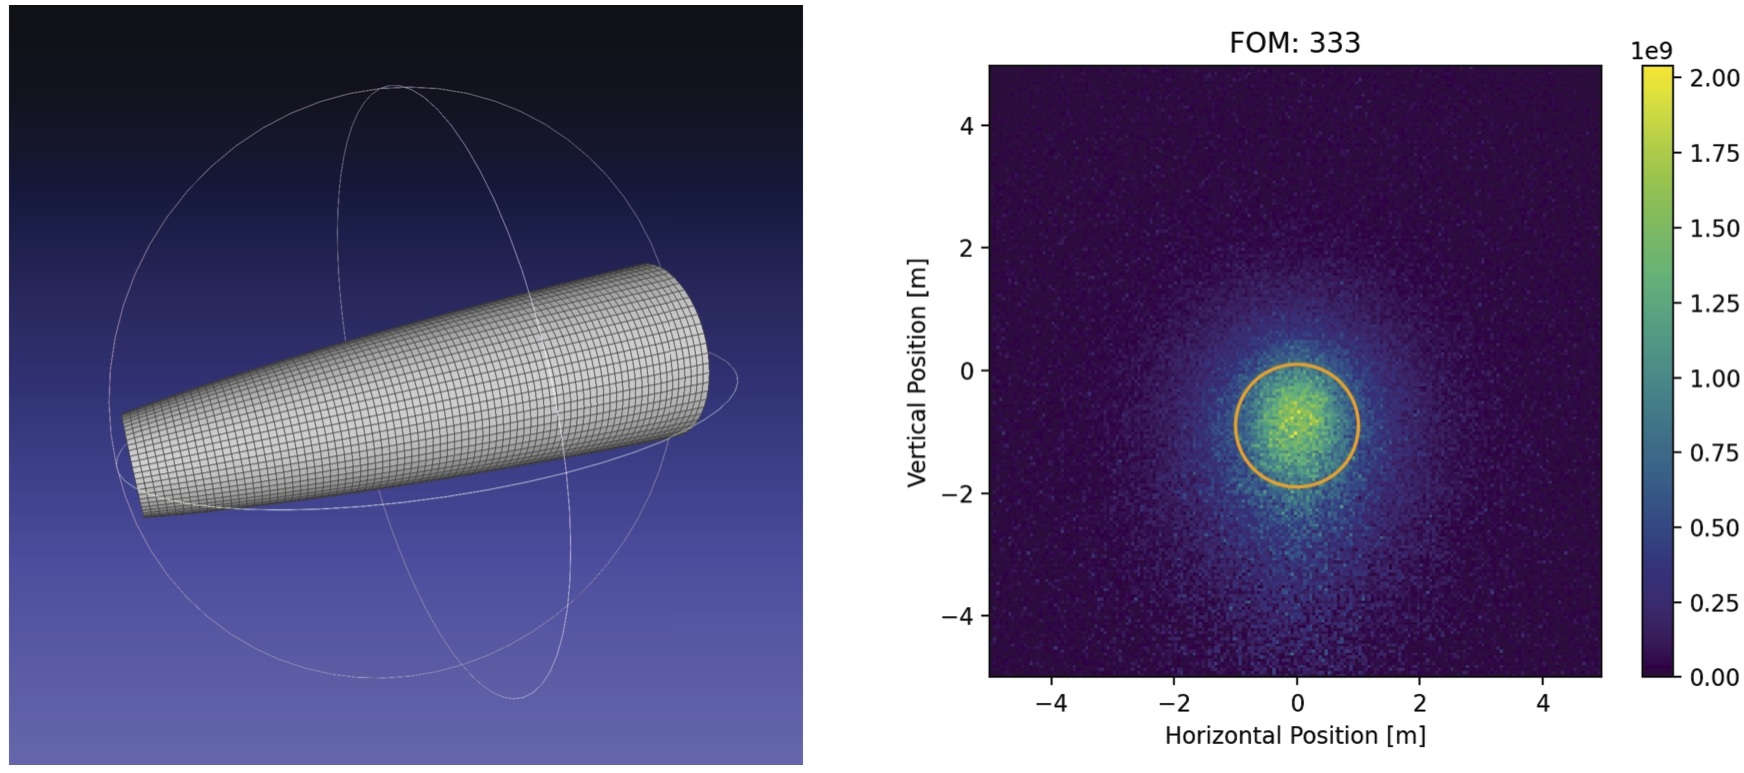 (Left) 3D visualization of the 40 m long baseline reflector (axis are not in scale). (Right) result of a McStas simulation with the baseline reflector for an accelerator power of 2 MW. The orange circle marks the detector area of 1 m radius. The FOM is 333.